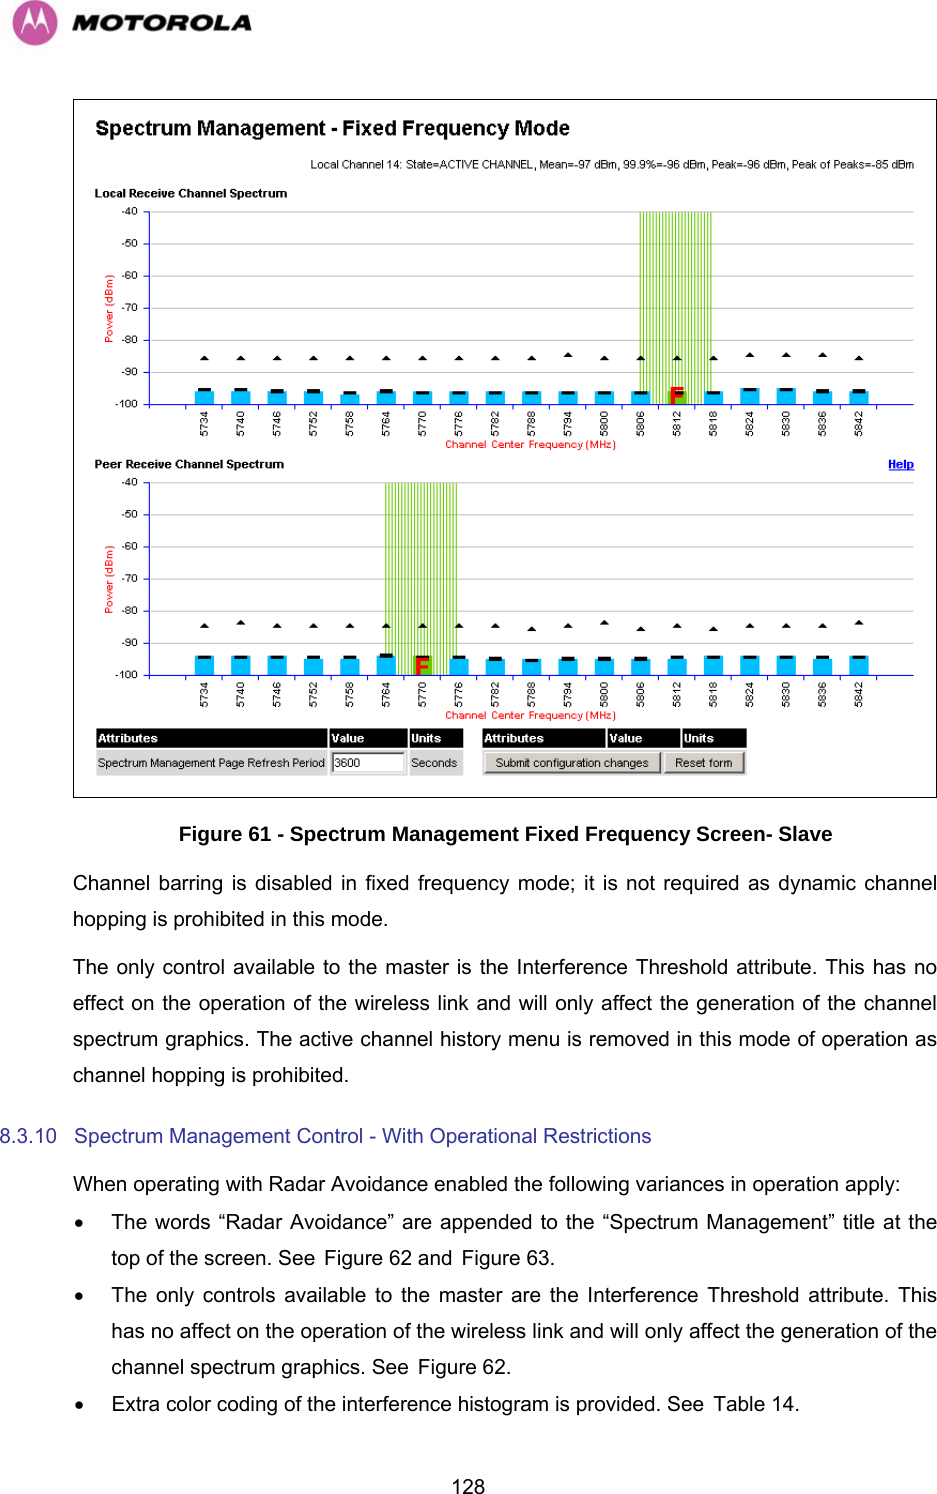   128 Figure 61 - Spectrum Management Fixed Frequency Screen- Slave Channel barring is disabled in fixed frequency mode; it is not required as dynamic channel hopping is prohibited in this mode. The only control available to the master is the Interference Threshold attribute. This has no effect on the operation of the wireless link and will only affect the generation of the channel spectrum graphics. The active channel history menu is removed in this mode of operation as channel hopping is prohibited. 8.3.10  Spectrum Management Control - With Operational Restrictions  When operating with Radar Avoidance enabled the following variances in operation apply: •  The words “Radar Avoidance” are appended to the “Spectrum Management” title at the top of the screen. See HFigure 62 and HFigure 63. •  The only controls available to the master are the Interference Threshold attribute. This has no affect on the operation of the wireless link and will only affect the generation of the channel spectrum graphics. See HFigure 62. •  Extra color coding of the interference histogram is provided. See HTable 14. 